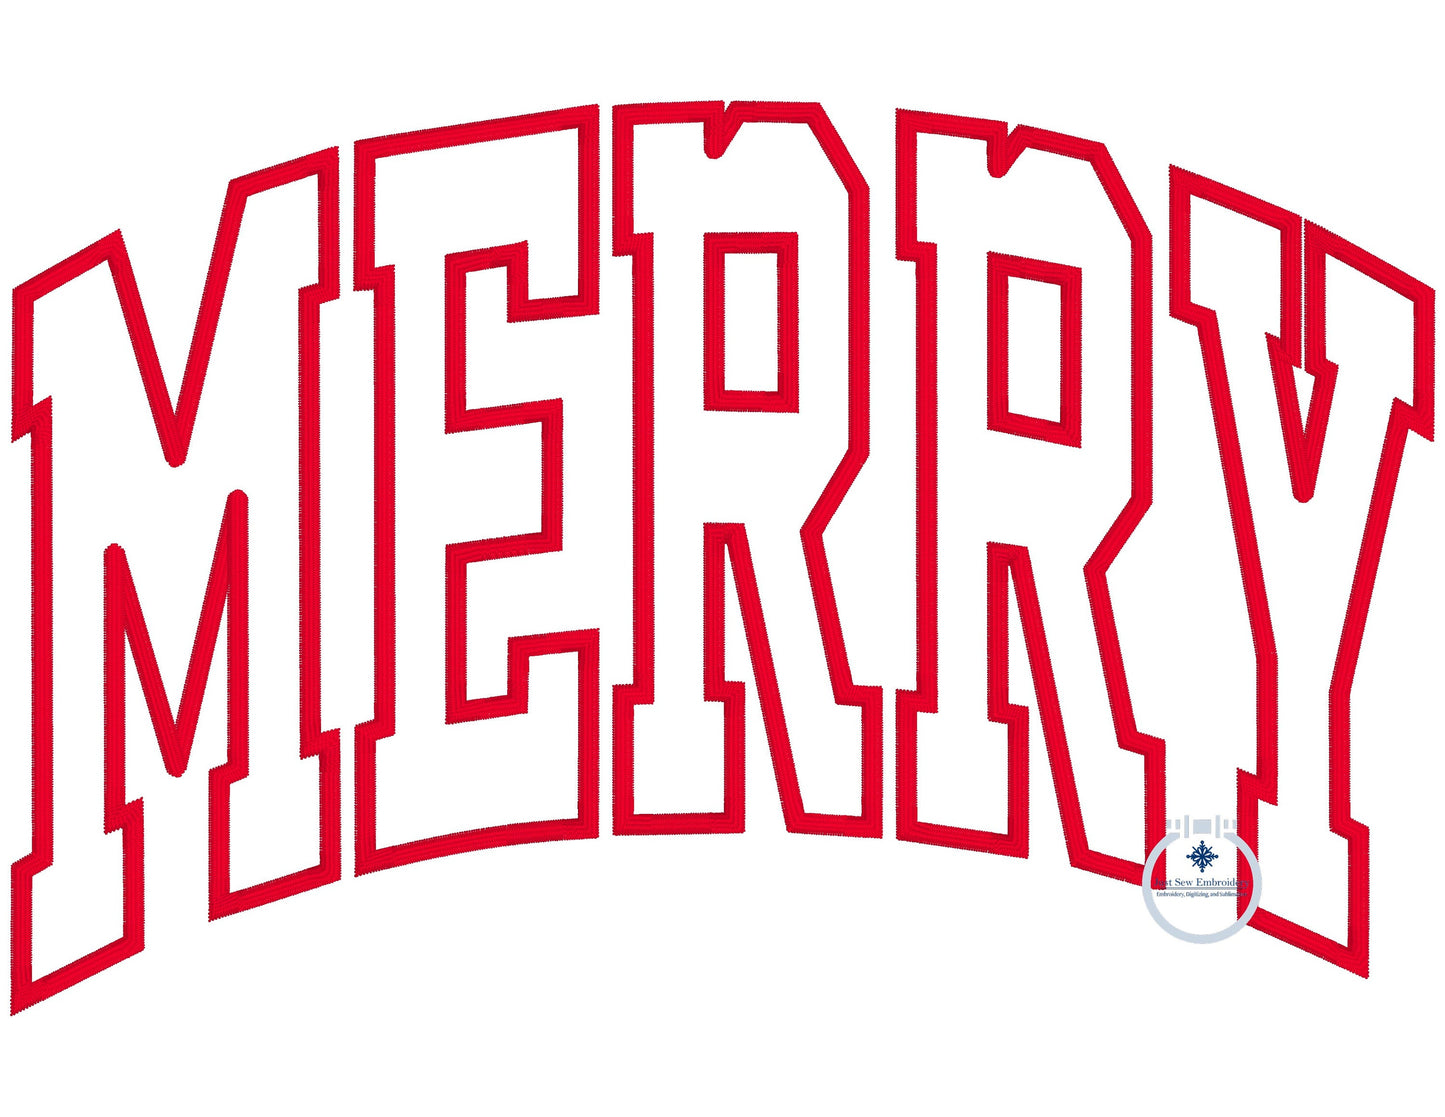 Merry Christmas Arched Applique Machine Embroidery Design with Satin Edge Stitch Four Sizes 5x7, 8x8, 6x10, 8x12 Hoop